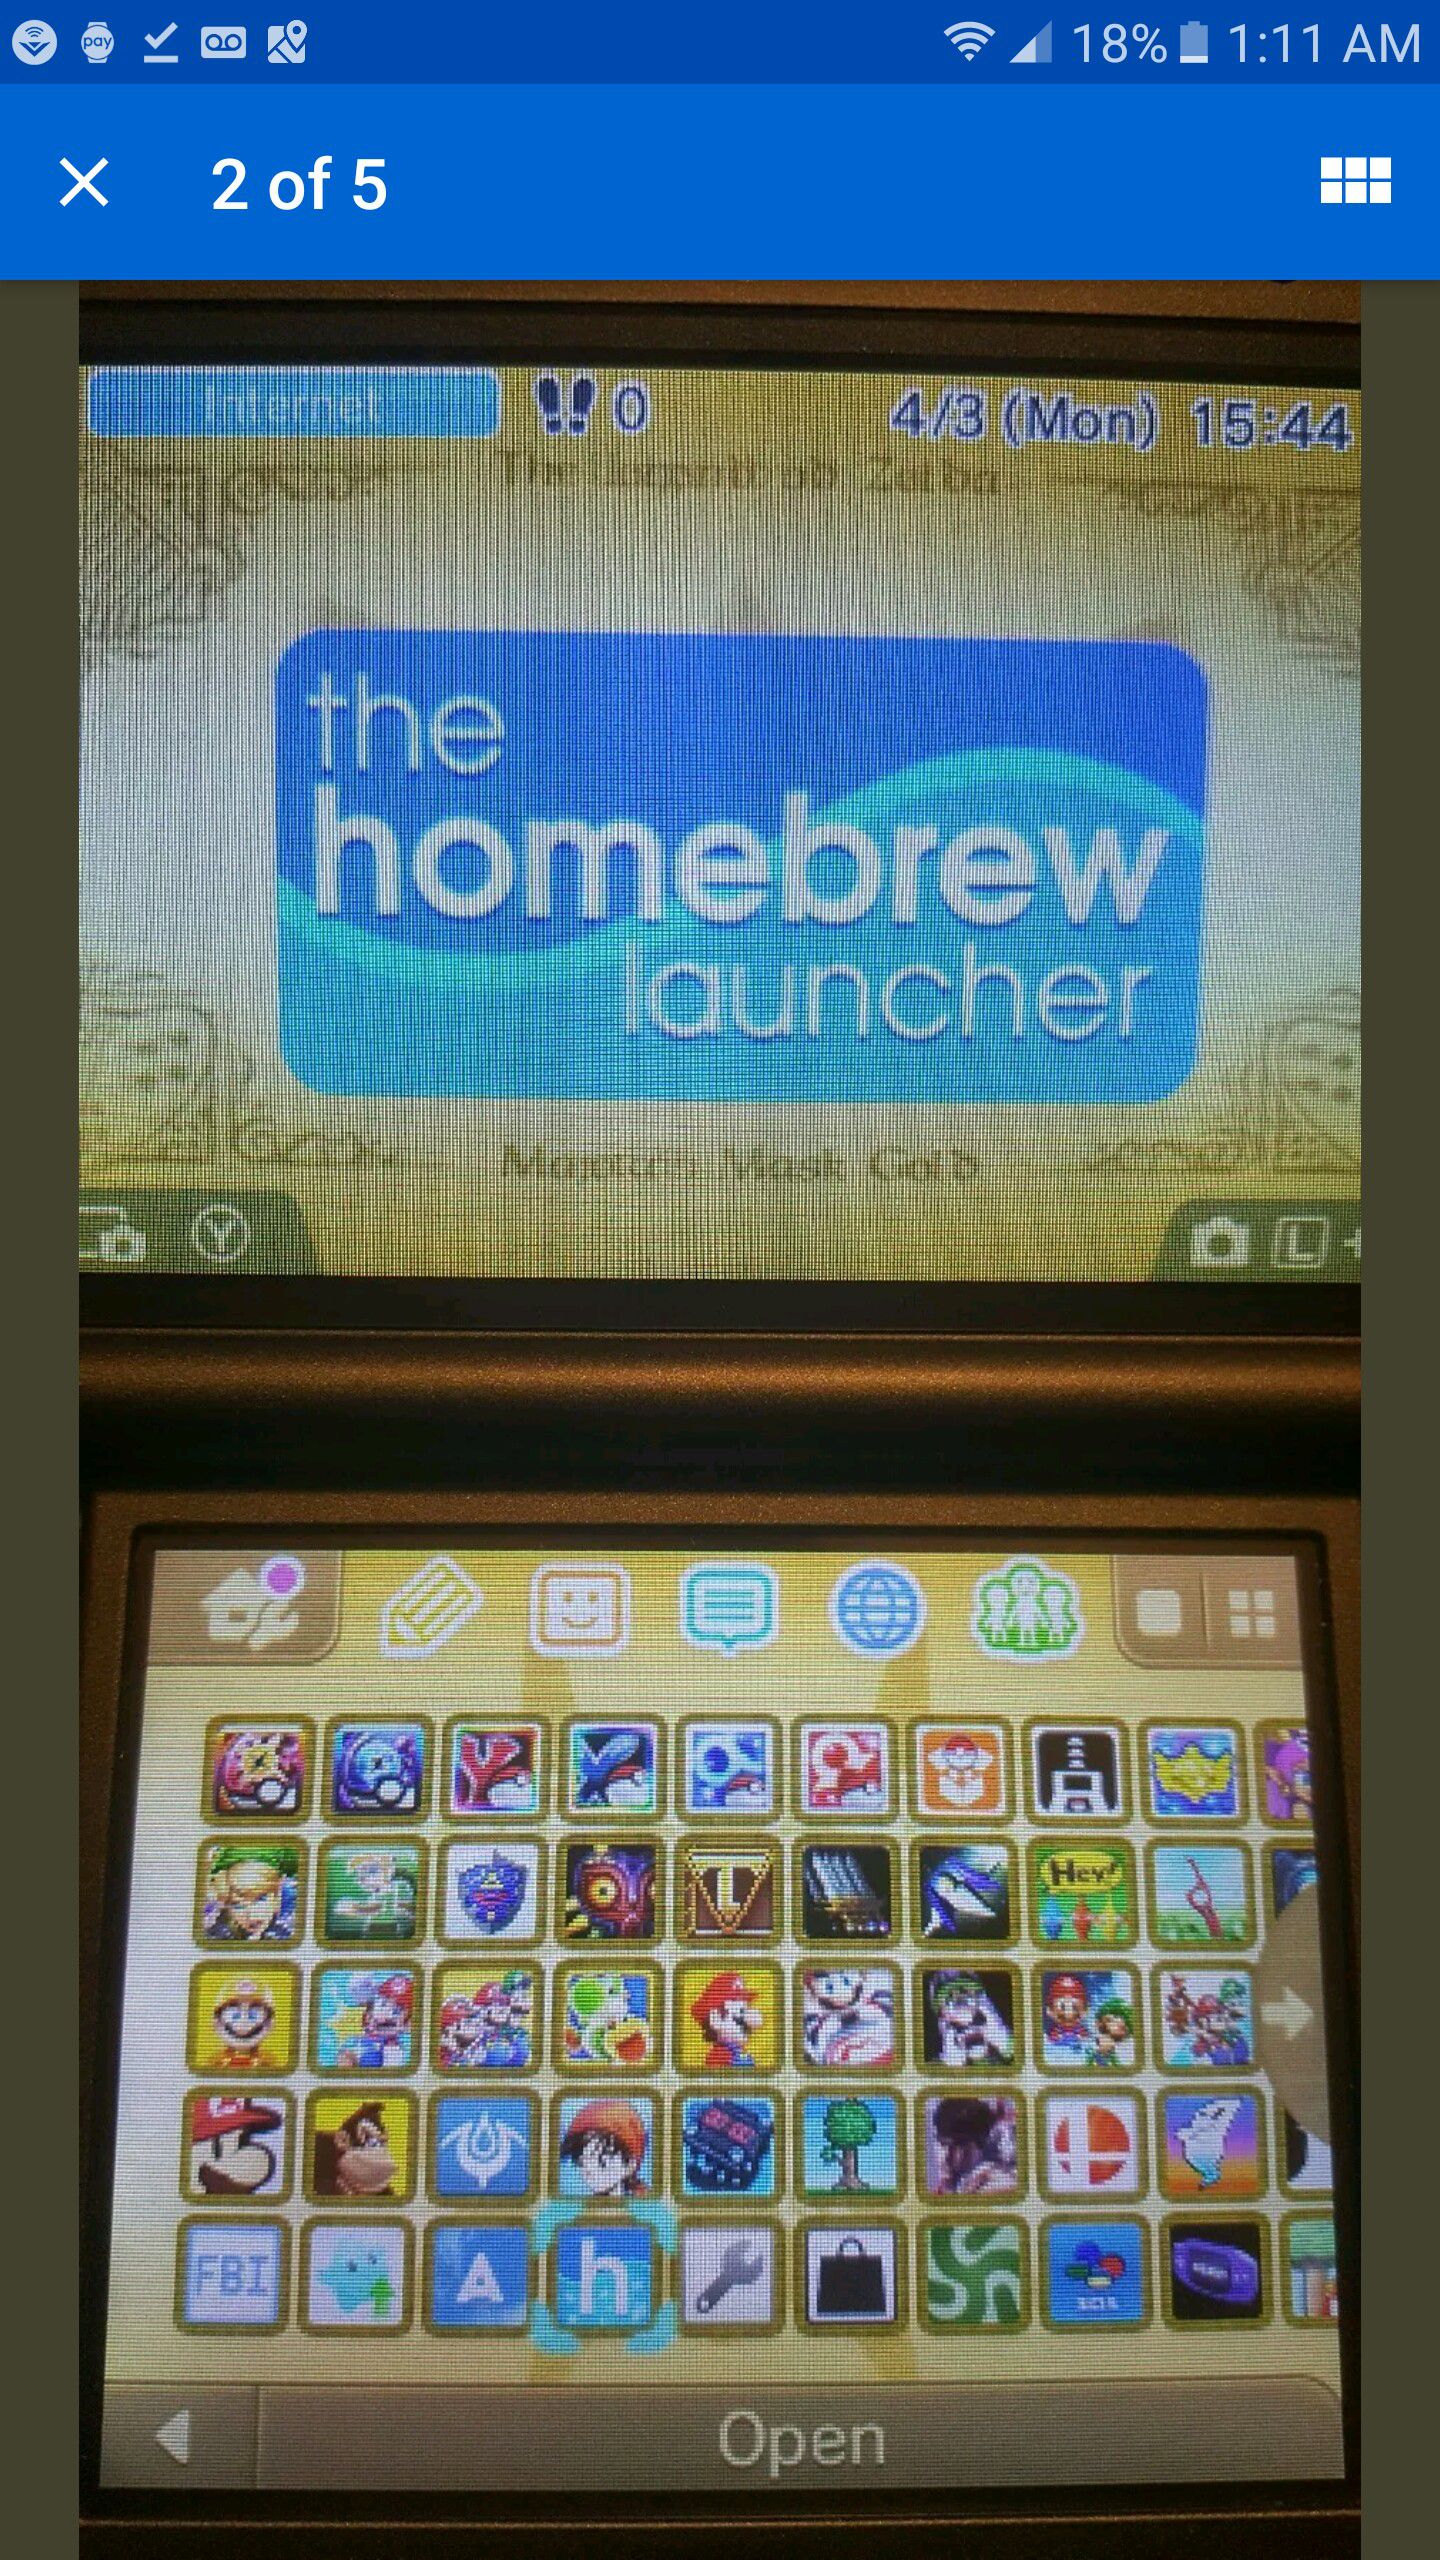 homebrew launcher 3ds 11.6